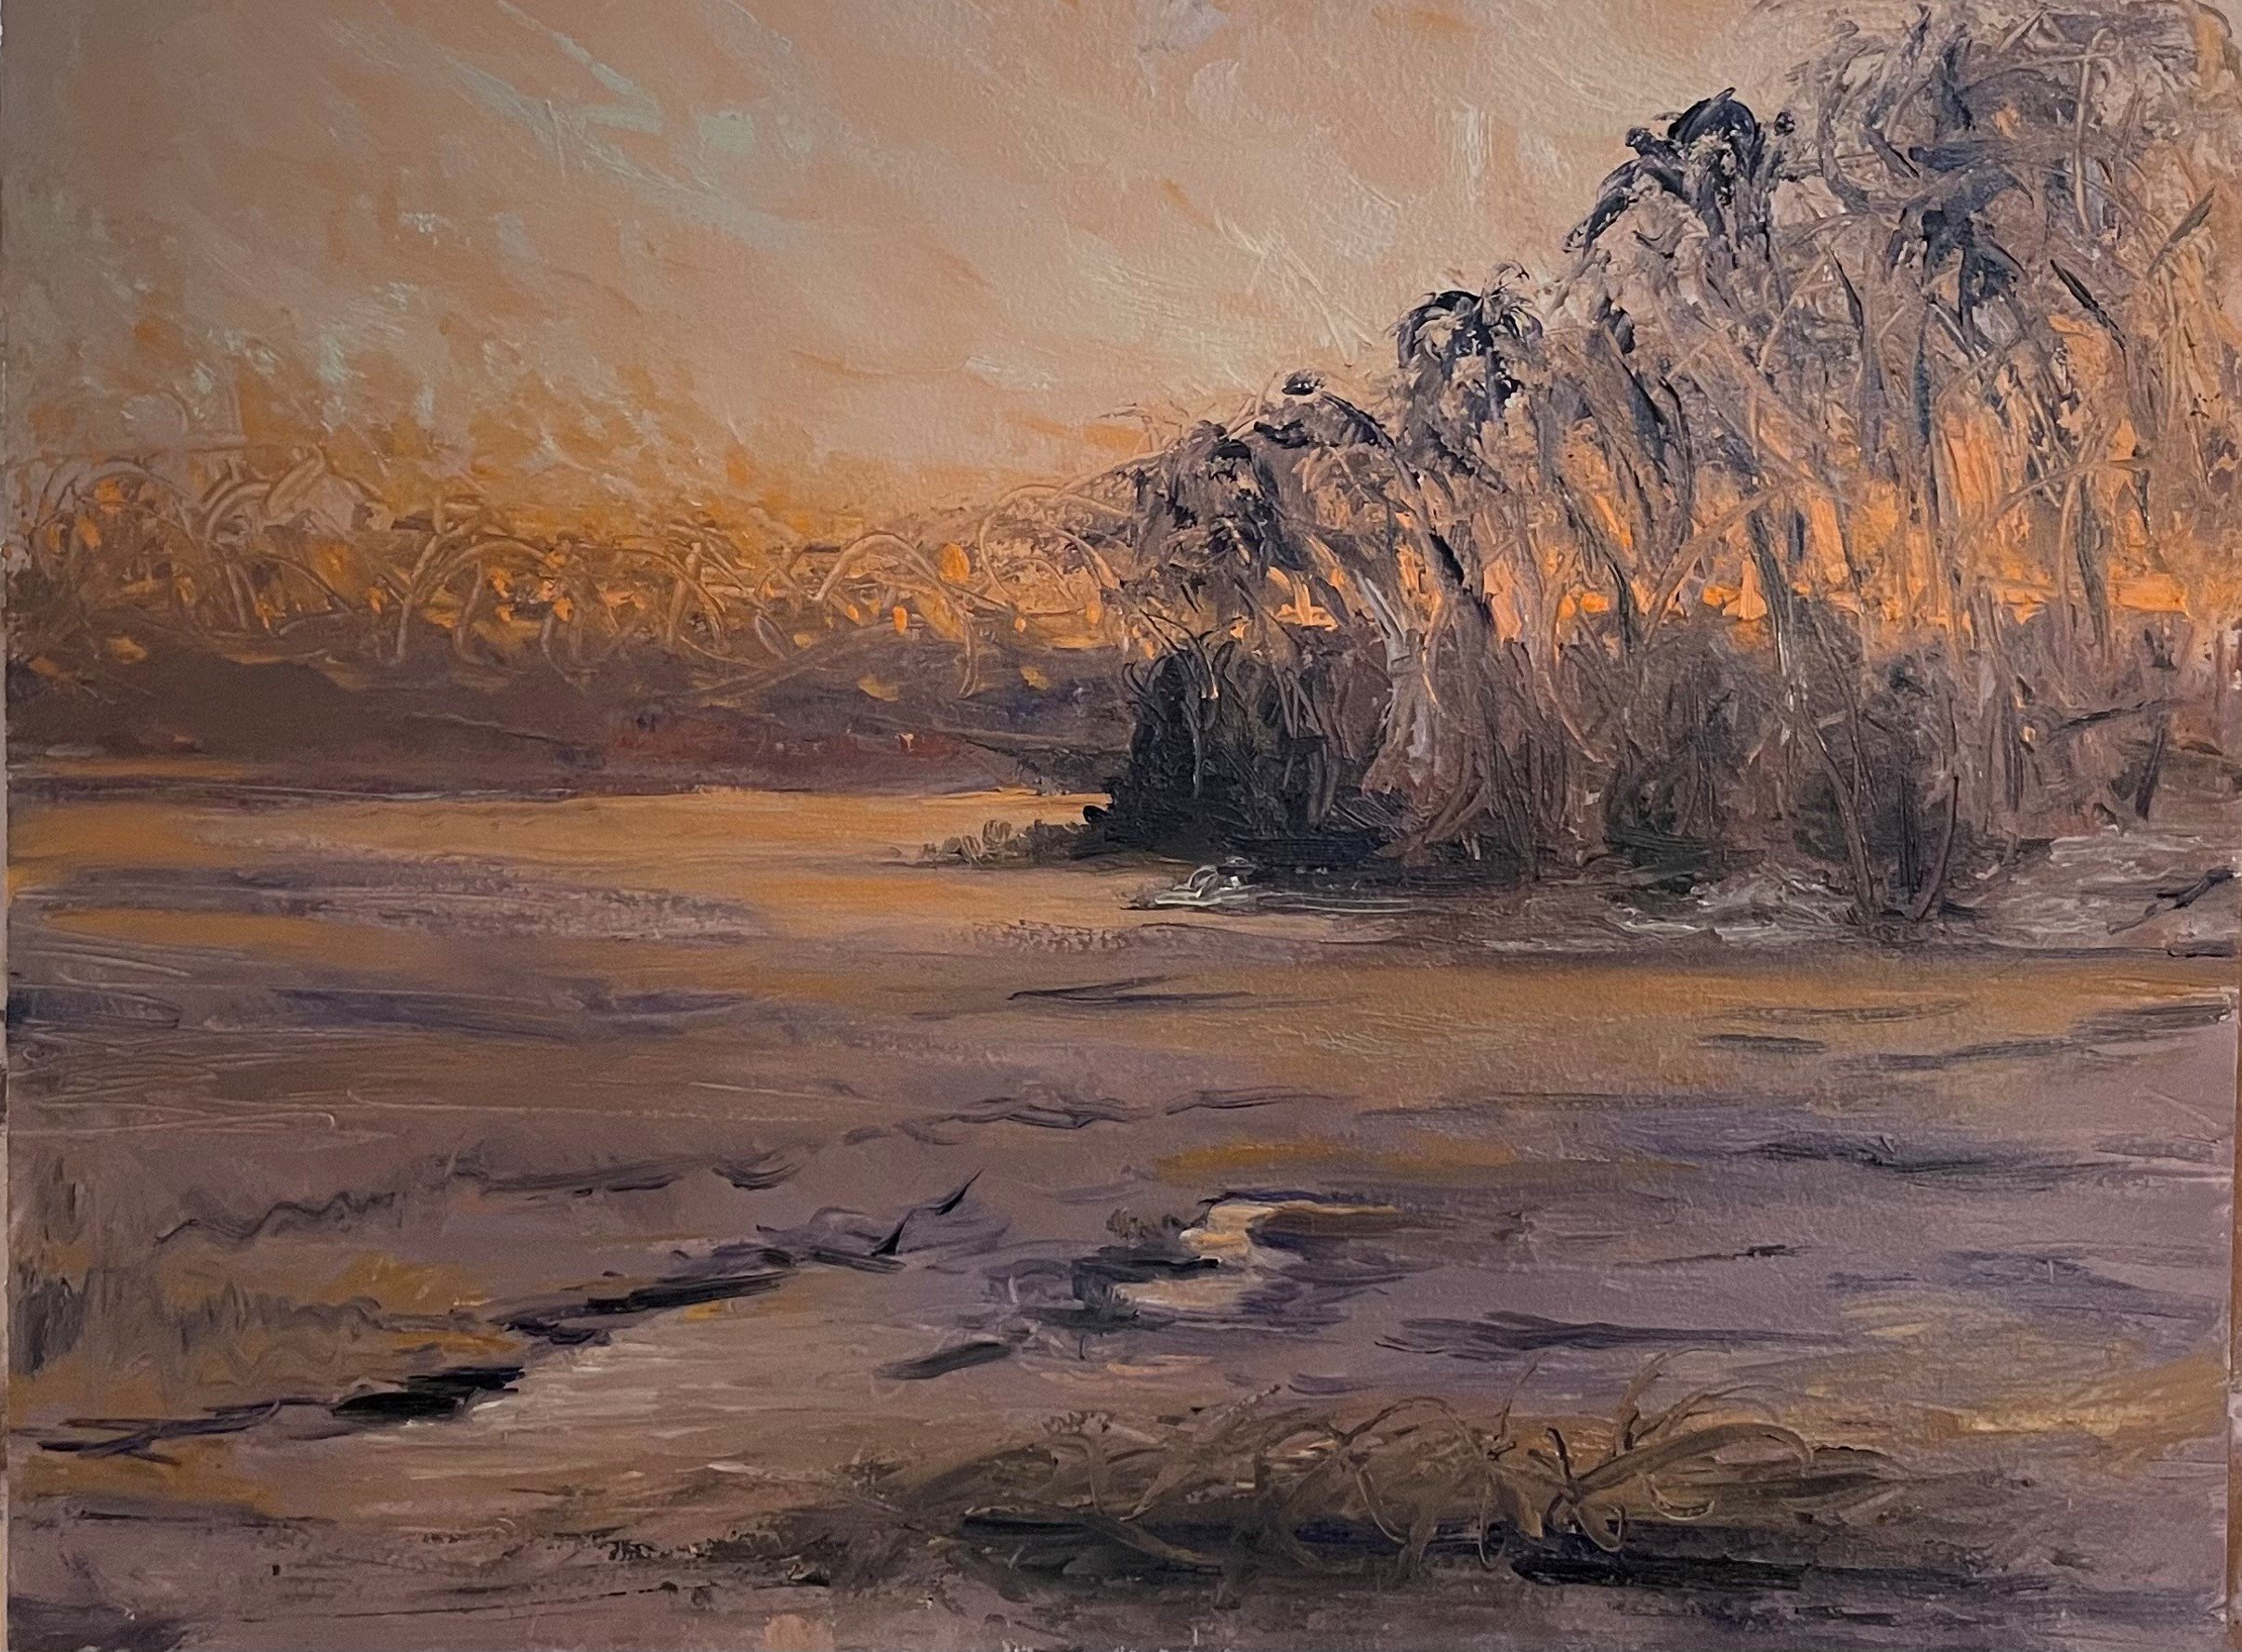 2021-12-01  Pine Creek Sunset   Oil on Gesso Paper   12 x 16  inches.jpg